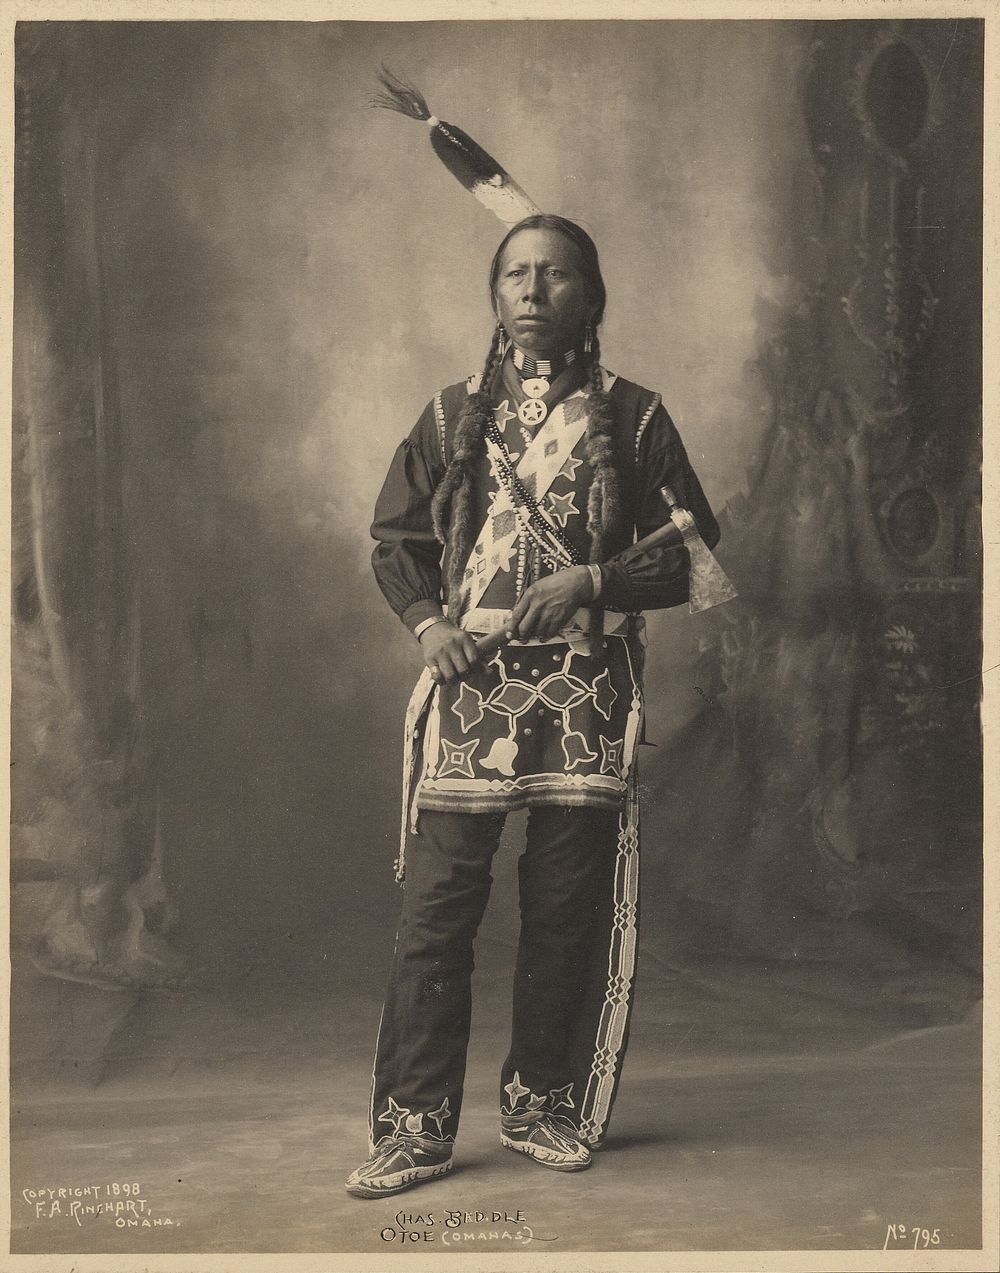 Chas. Biddle, Otoe (Omahas) by Adolph F Muhr and Frank A Rinehart